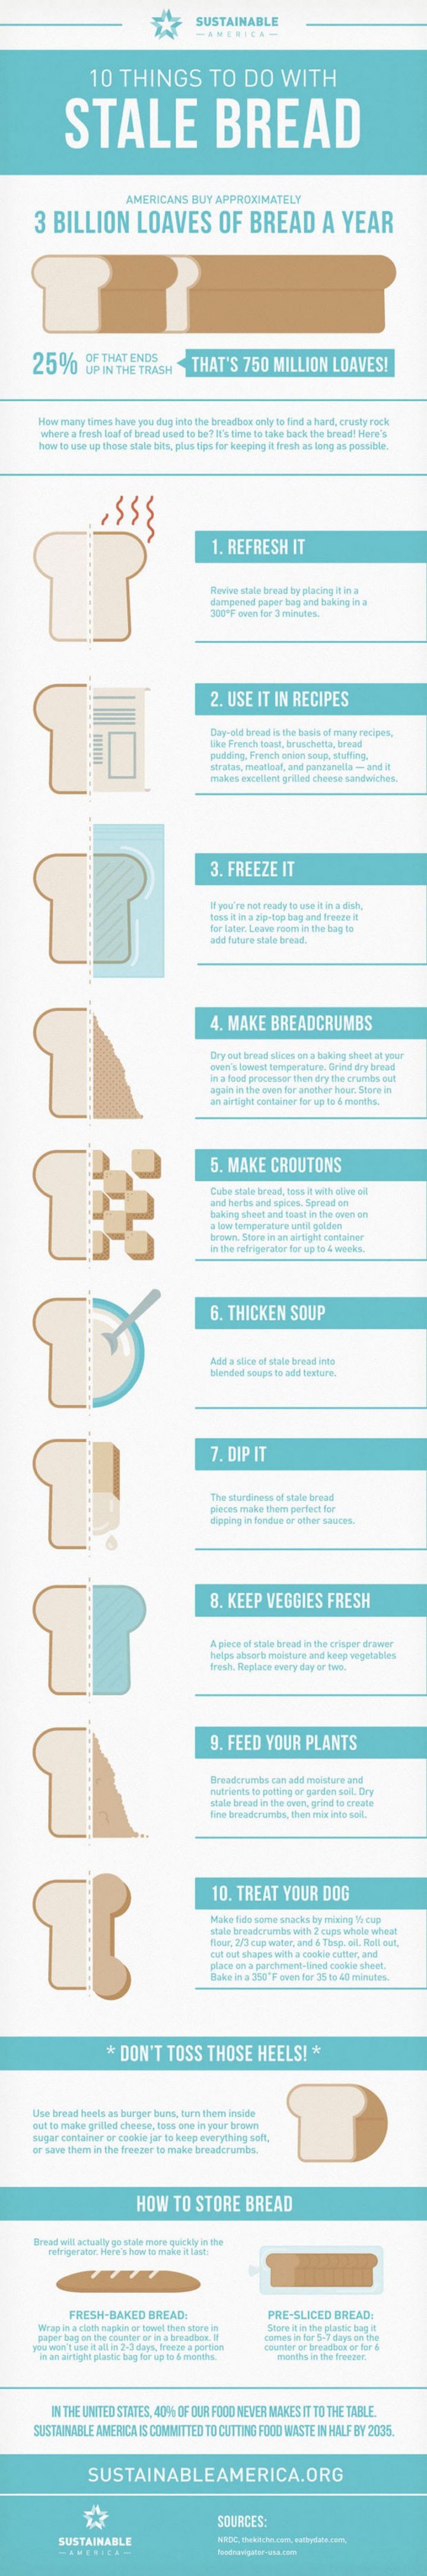 10 things to do with stale bread infographic.